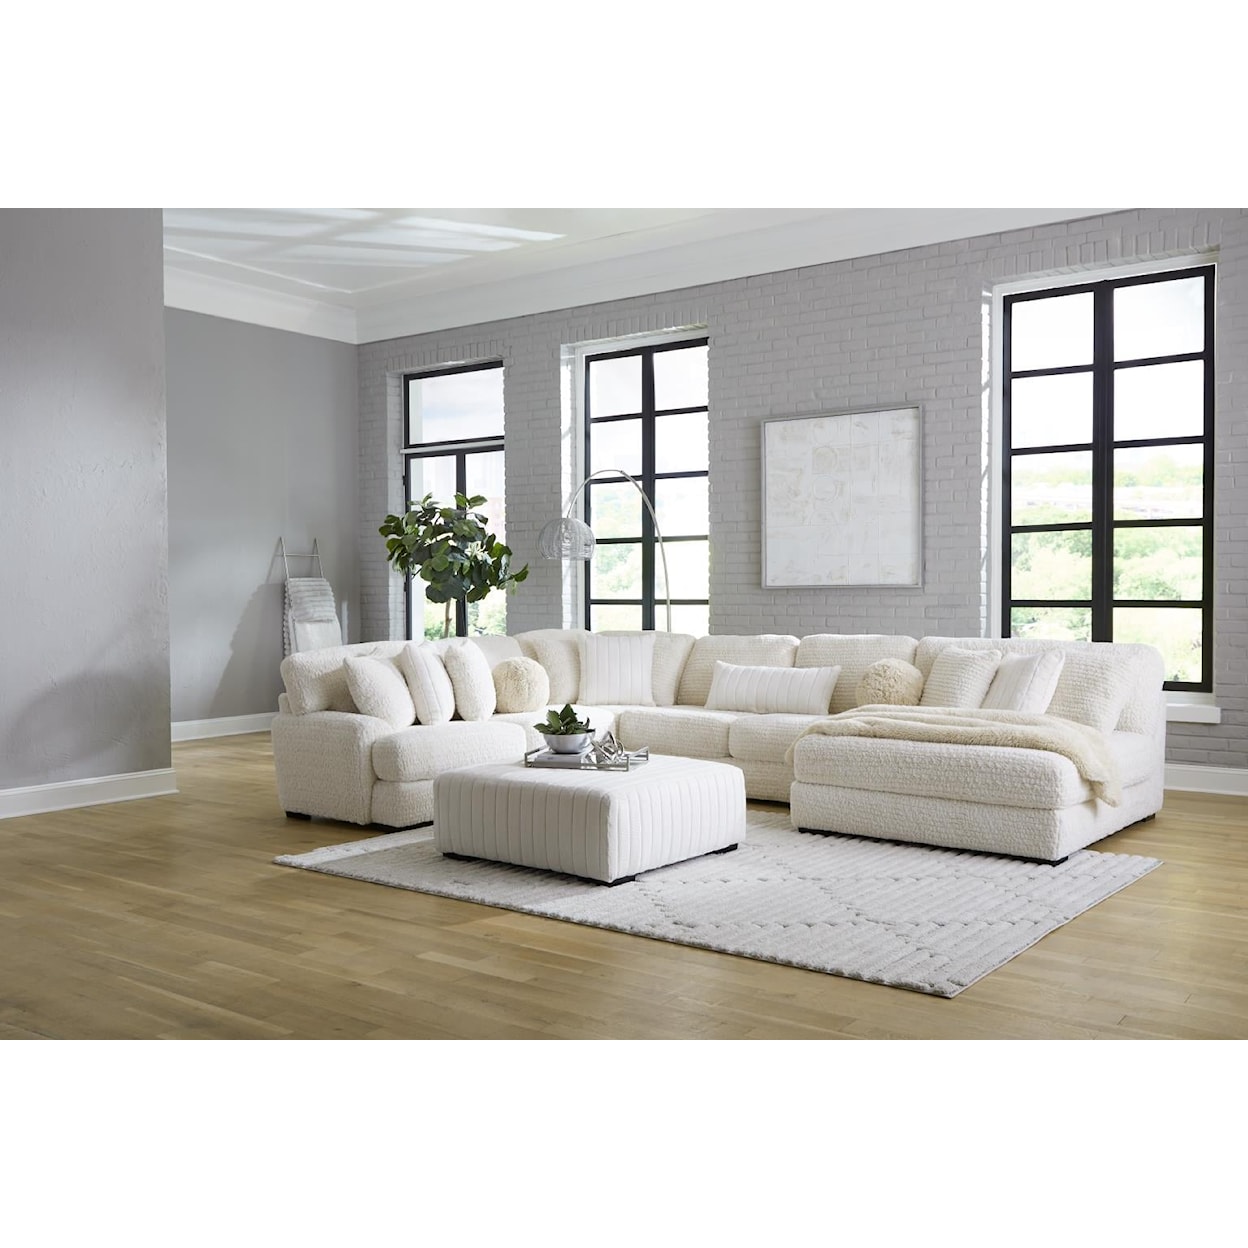 Albany 934 Doodle Ivory 3-Piece Sectional Sofa